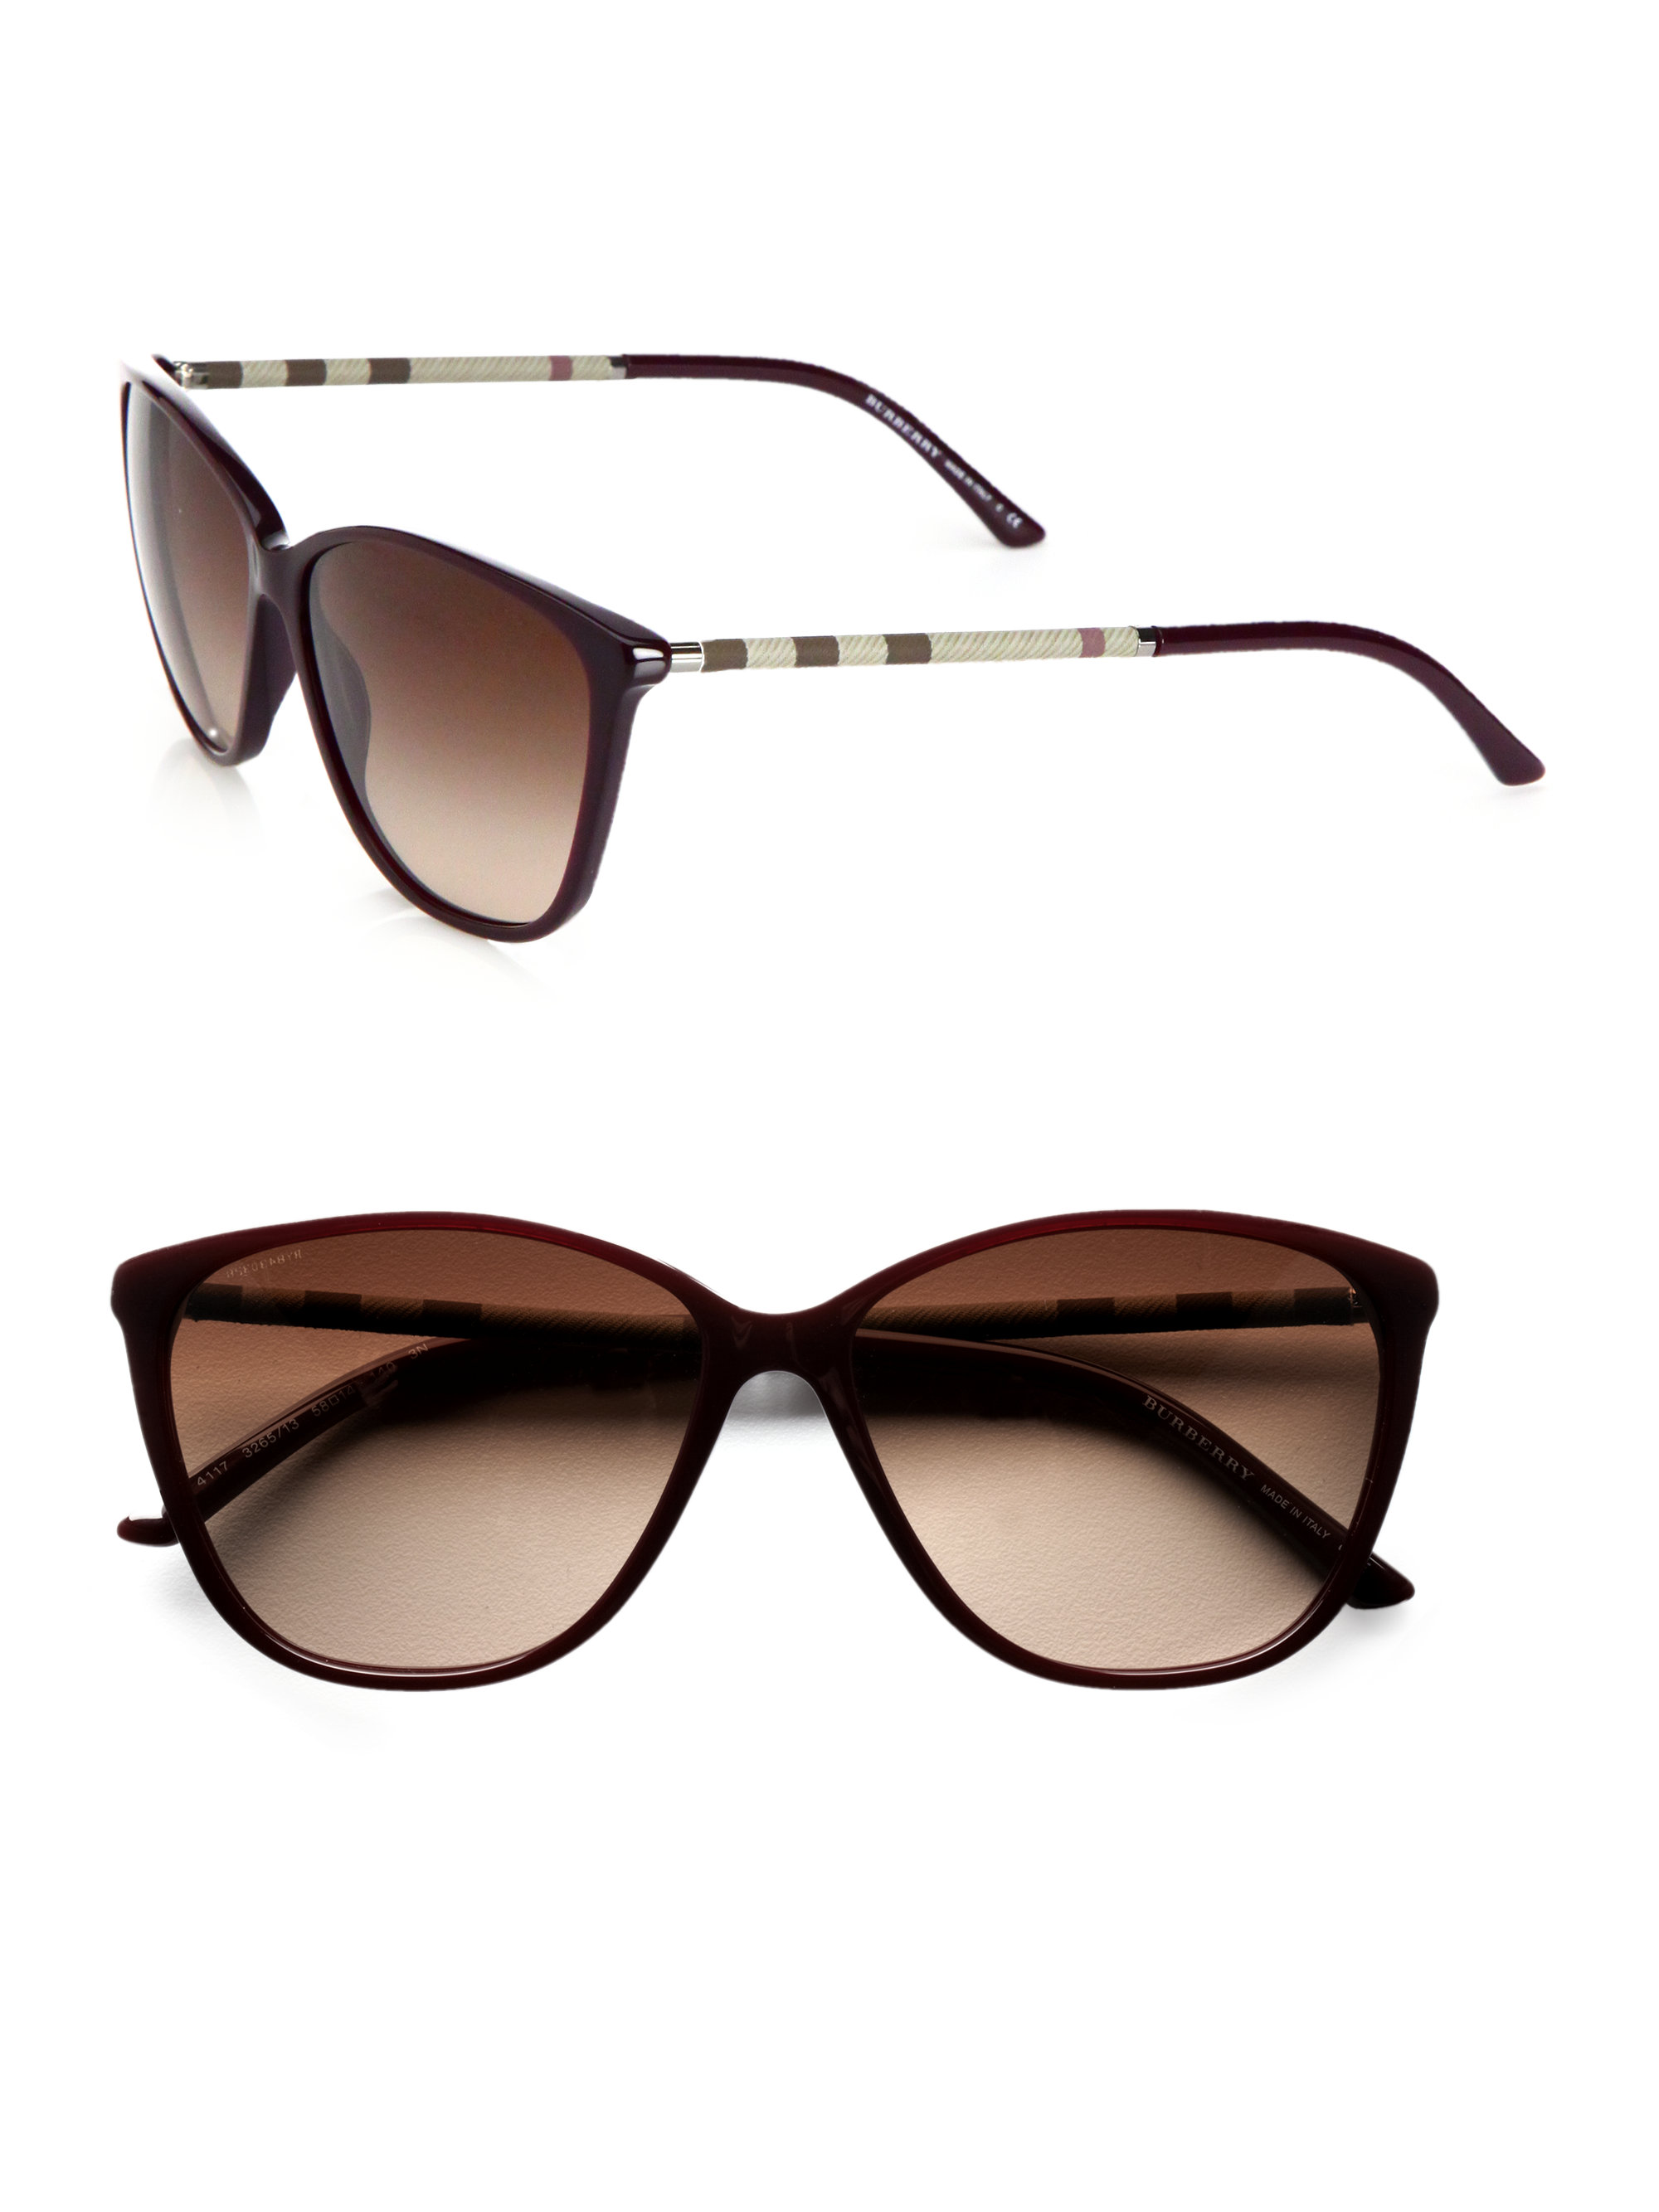 Burberry Catseye Check Sunglasses in Brown (tan) | Lyst